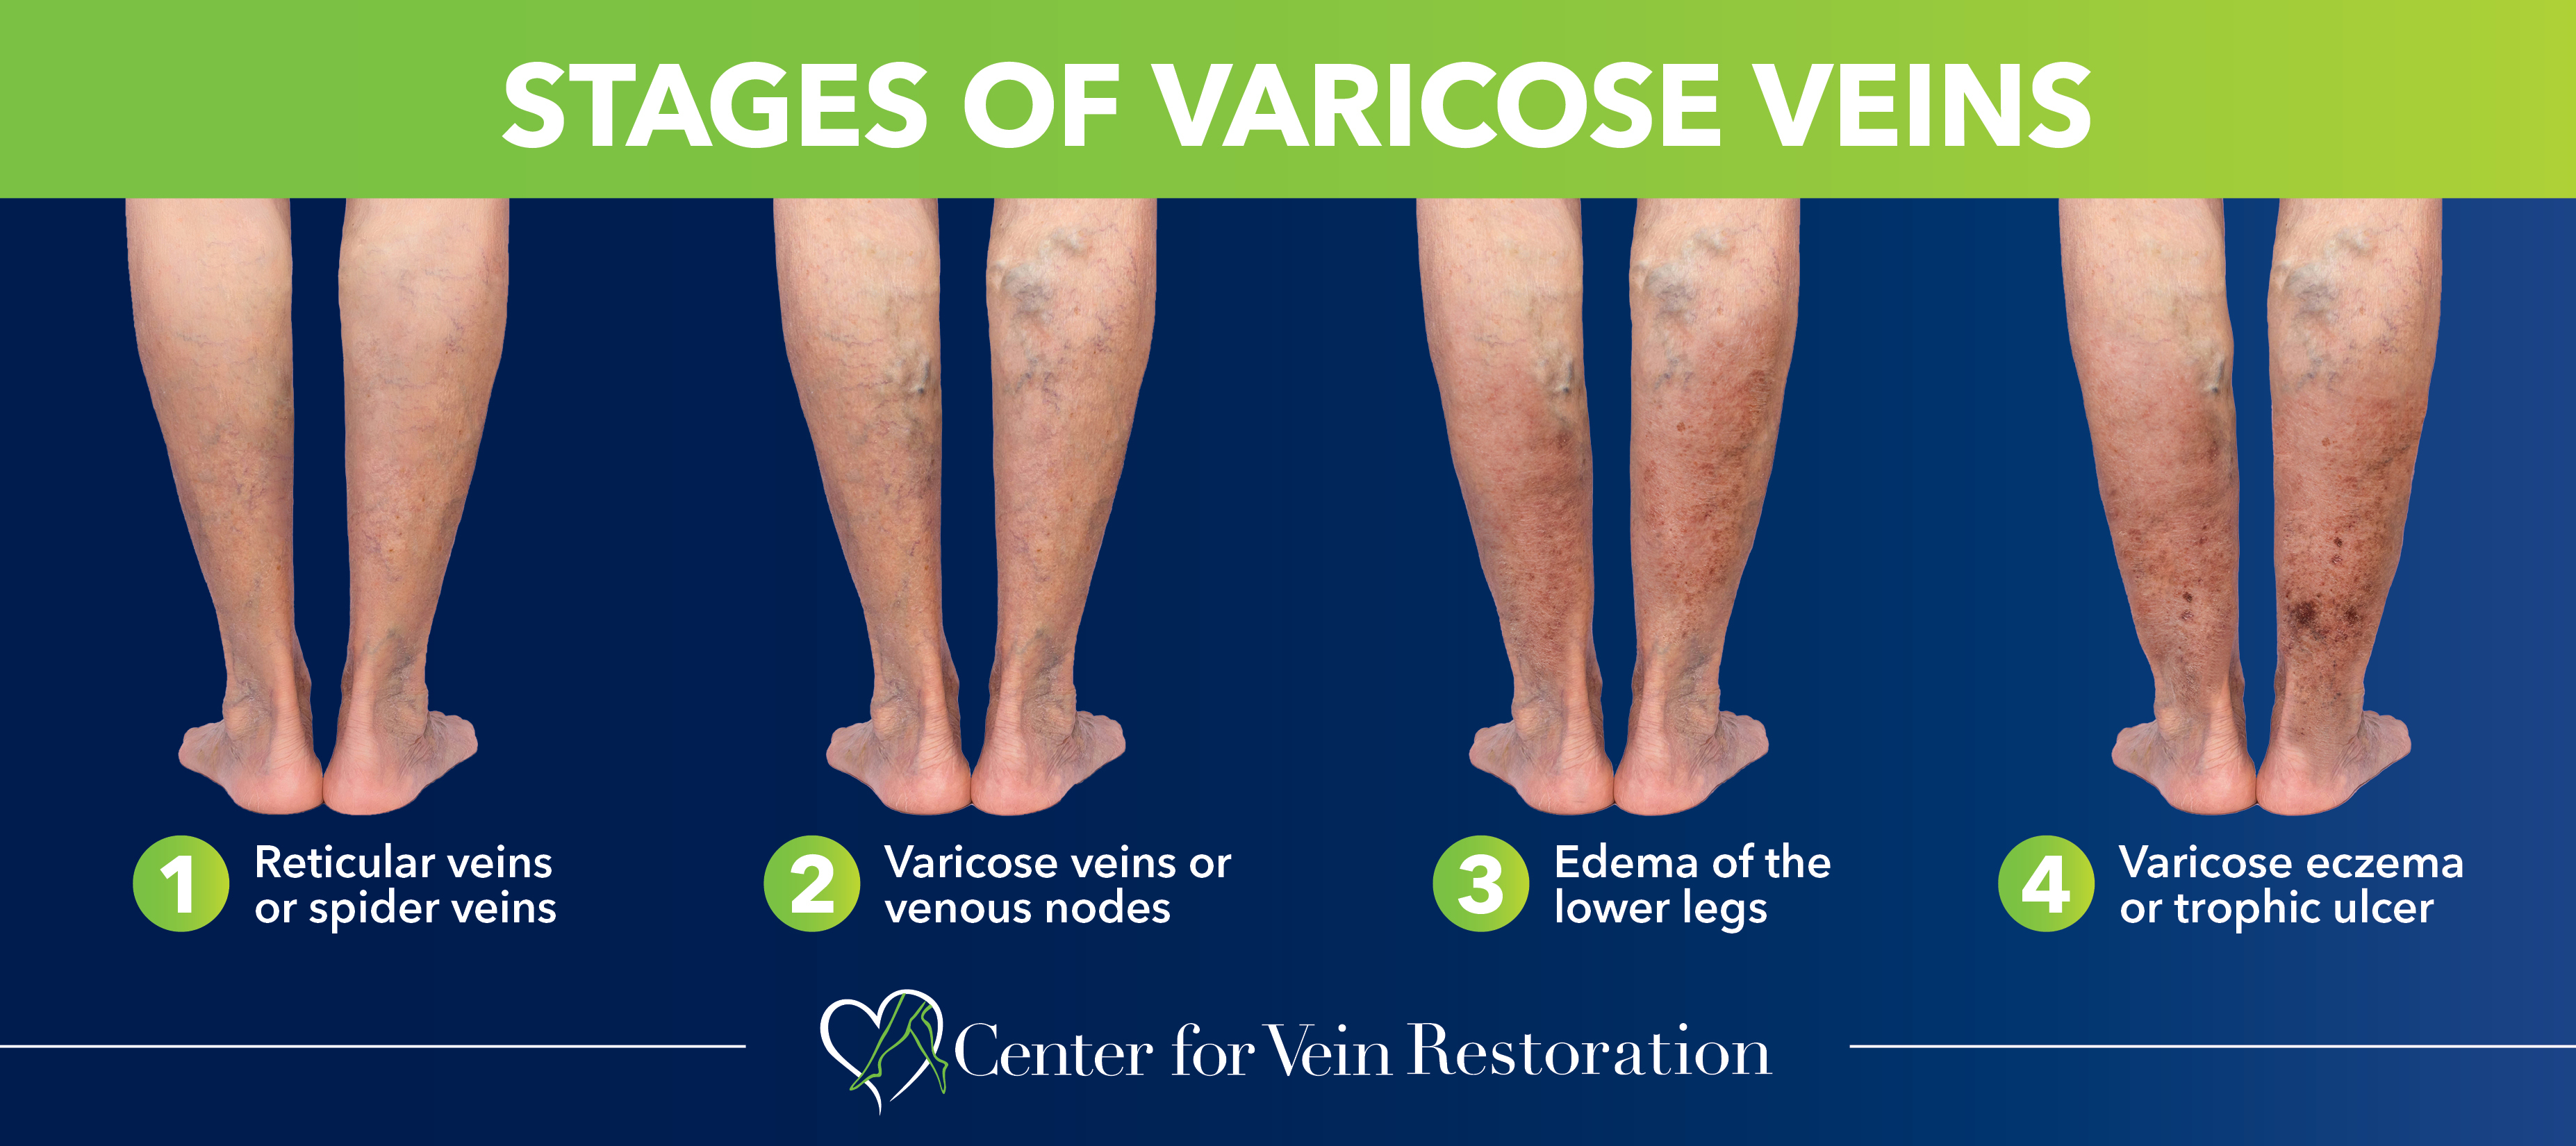 What are the Stages of Varicose Veins?